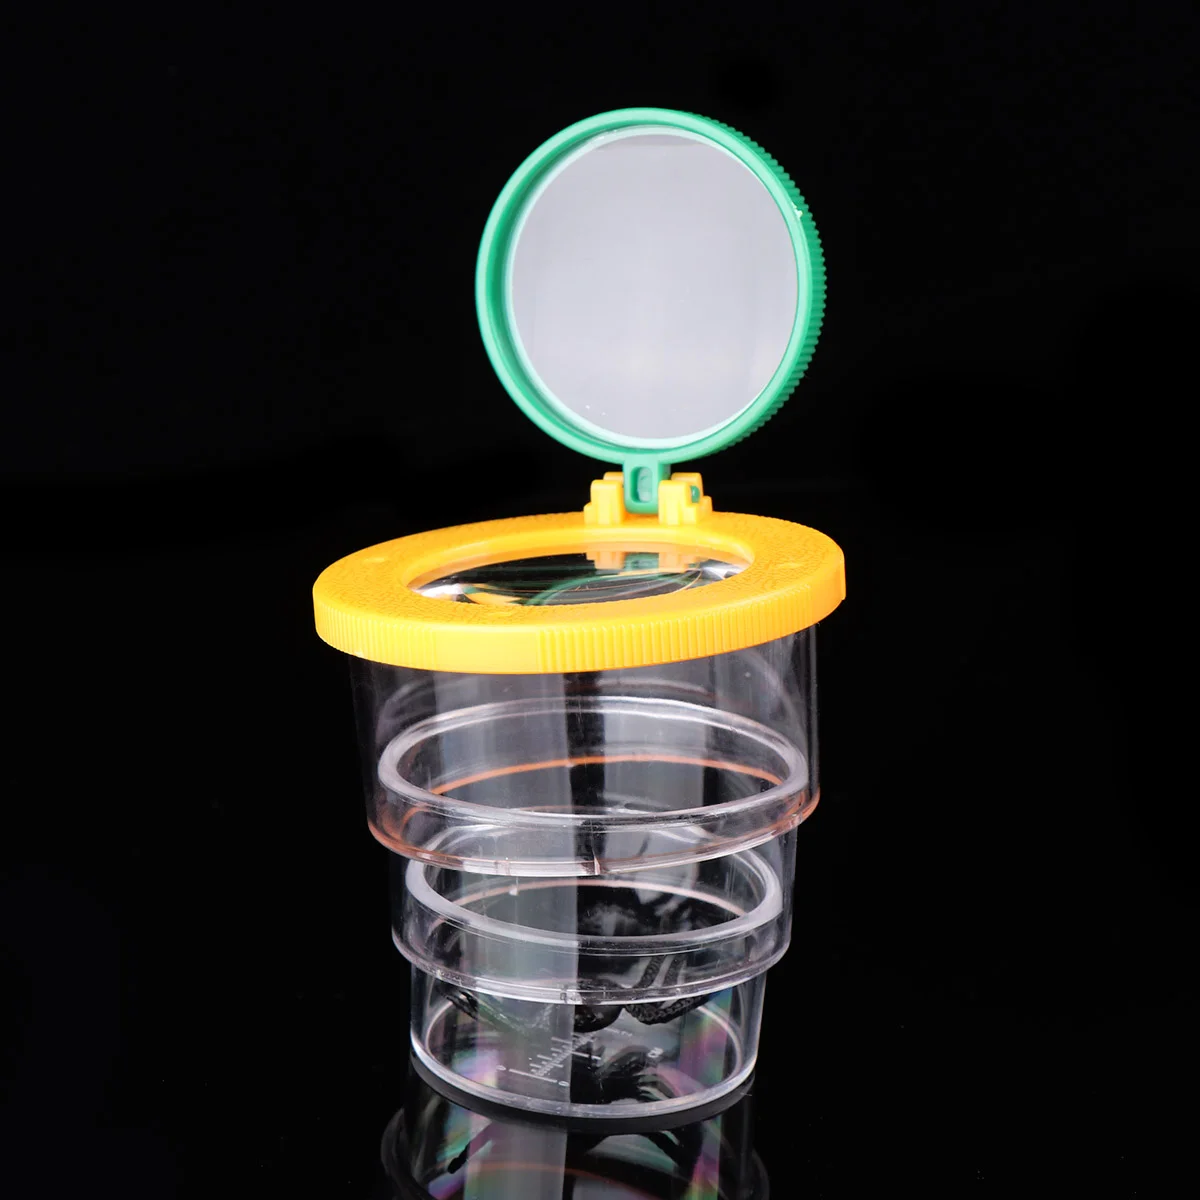 

3PCS Magnifying Insect Box, Bug Observation Box Bug Magnifier Container Bug Viewer Critter for Kids Educational Science Nature